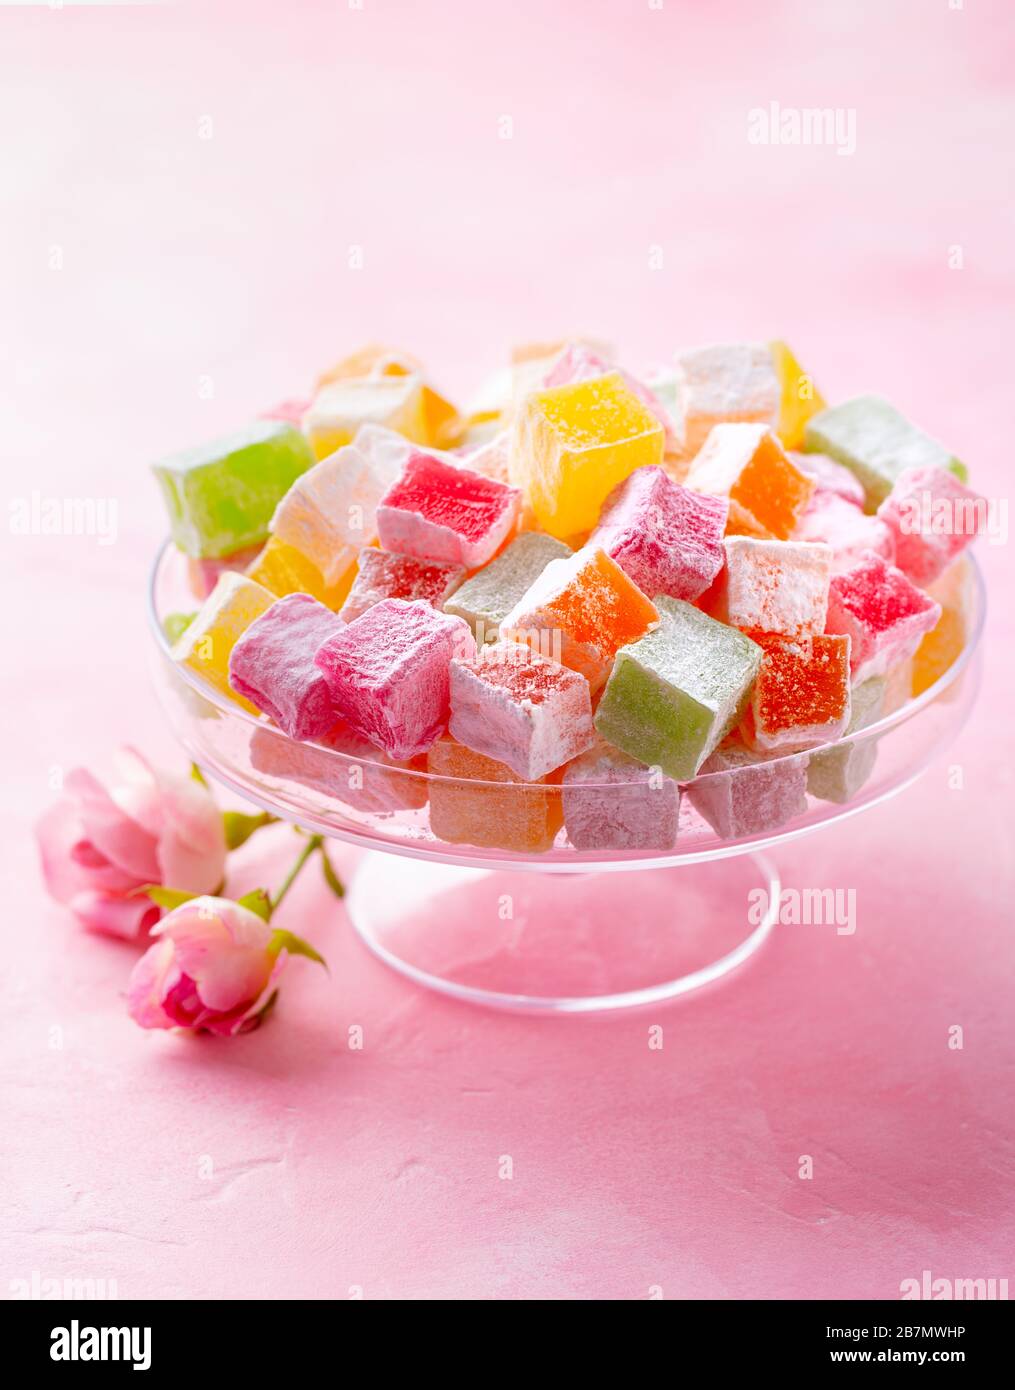 Assorted Turkish delights on glass cake stand. Pink background. Copy space. Stock Photo